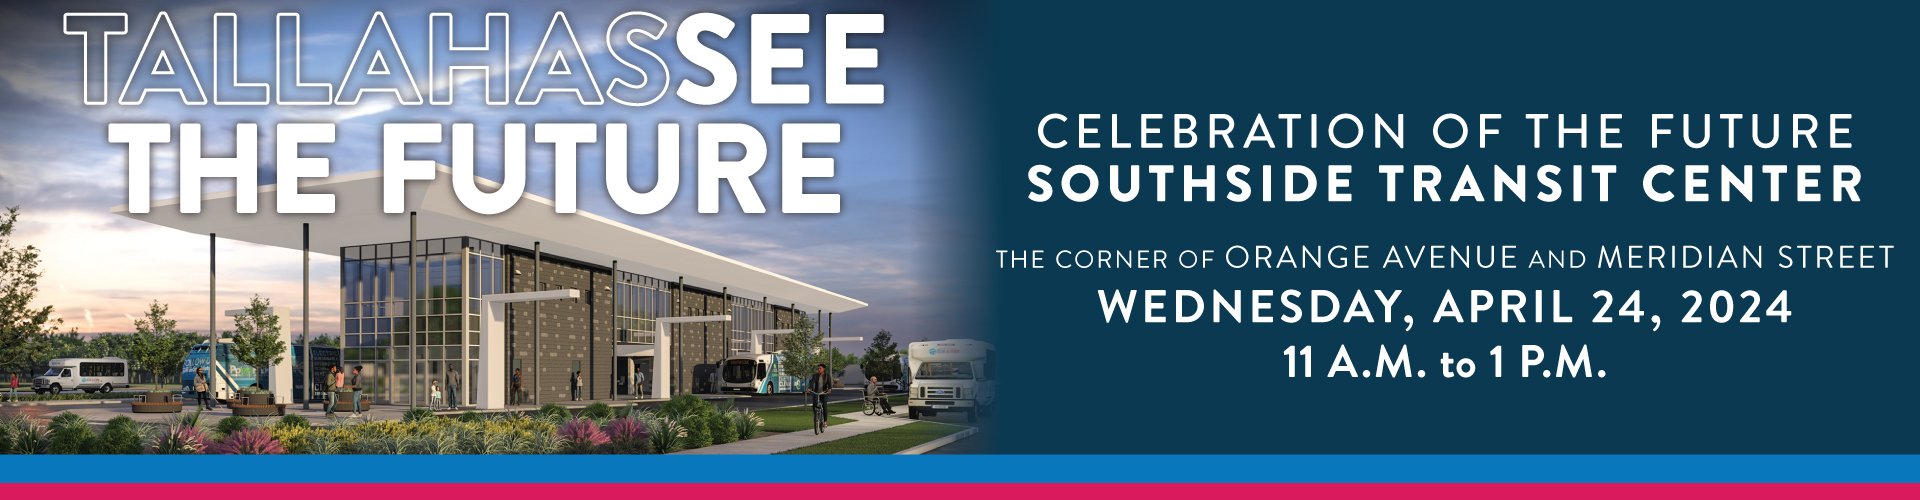 celebrate the future southside transit center on Wednesday April 24 at 11a.m.